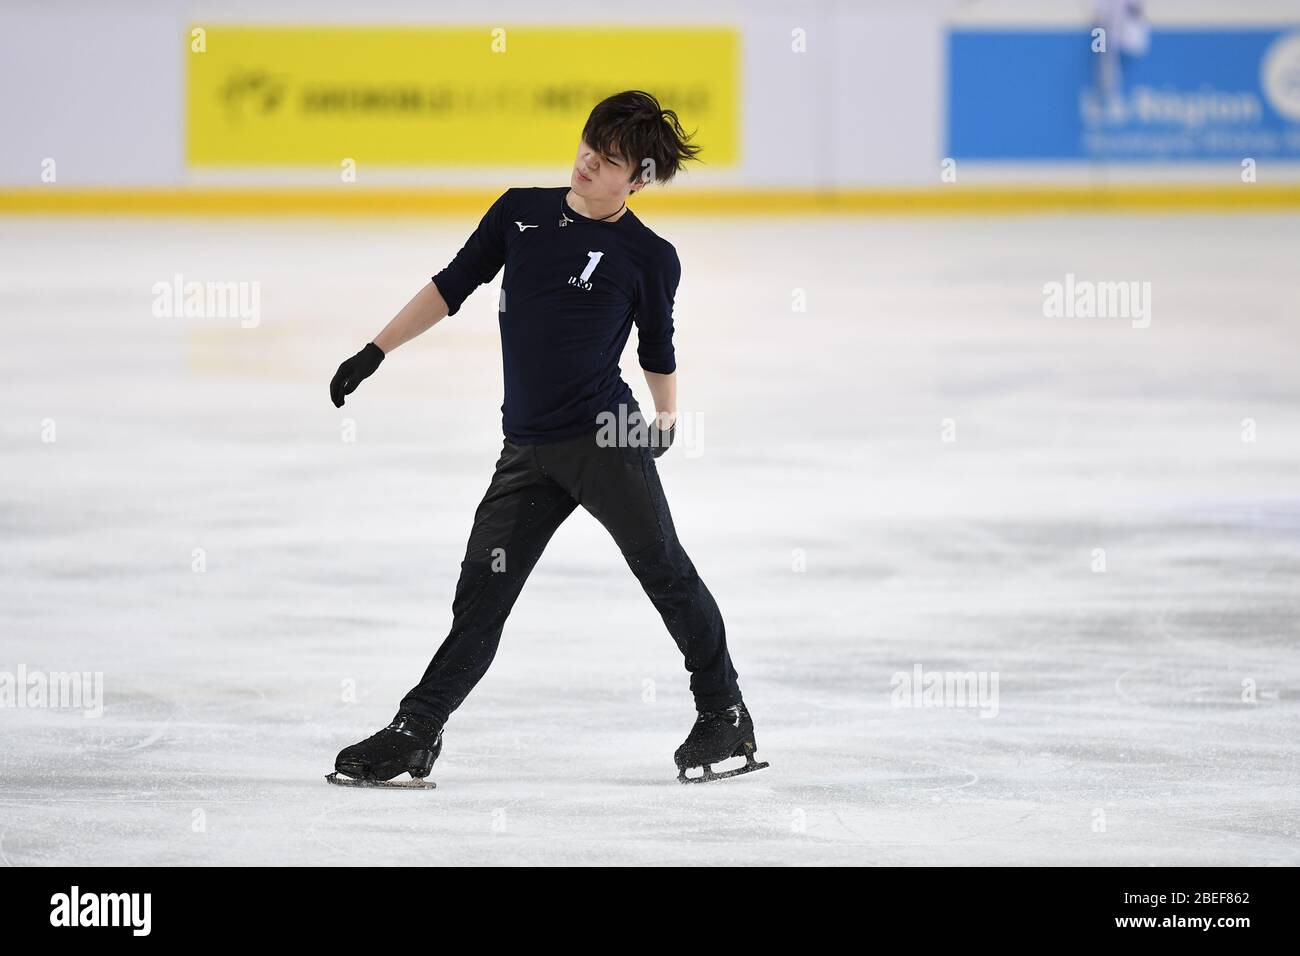 Shoma UNO, from Japan, during practice at ISU Grand Prix of Figure Skating 2019, Internationaux de France de Patinage 2019, at Patinoire Polesud on October 31, 2019 in Grenoble, France. Credit: Raniero Corbelletti/AFLO/Alamy Live News Stock Photo